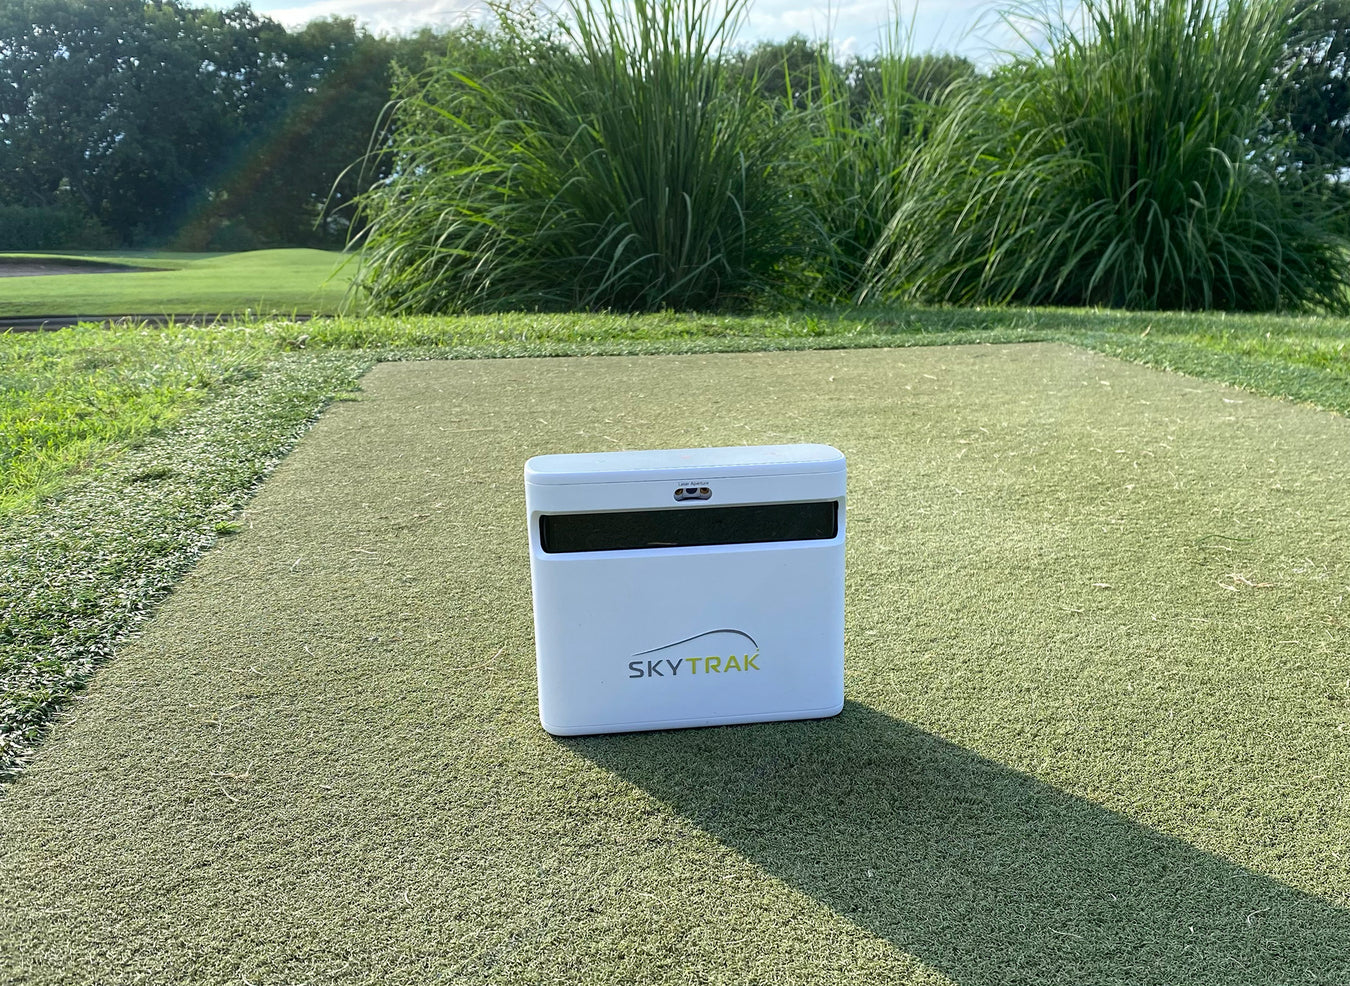 The SkyTrak+ unit on a golf range in front of tall grass and trees